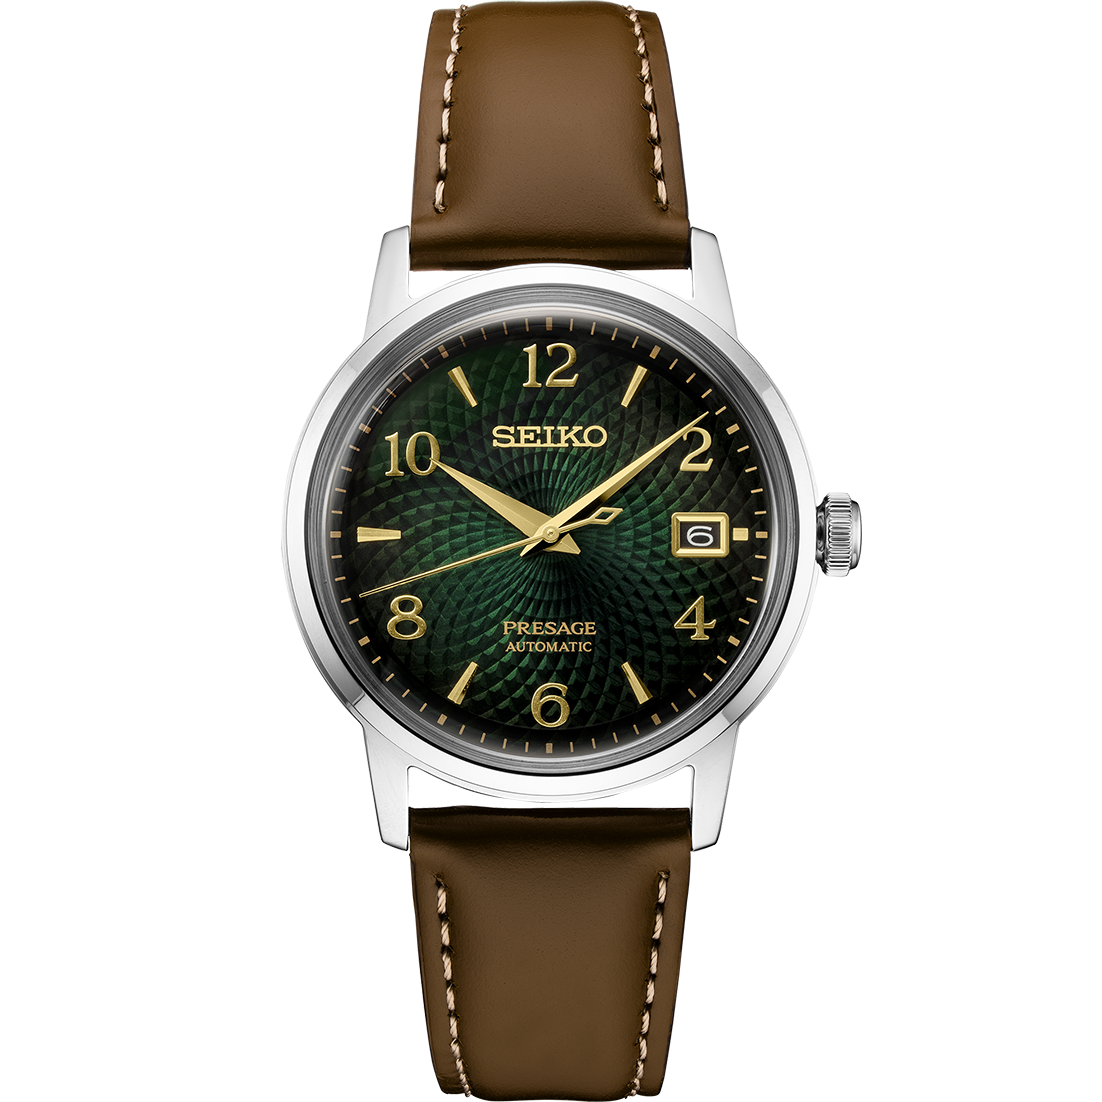 Seiko-Presage-SRPE45-Steel-385mm-Brown-Leather-Green-Dial-Automatic-Mens-Watch-133977477546